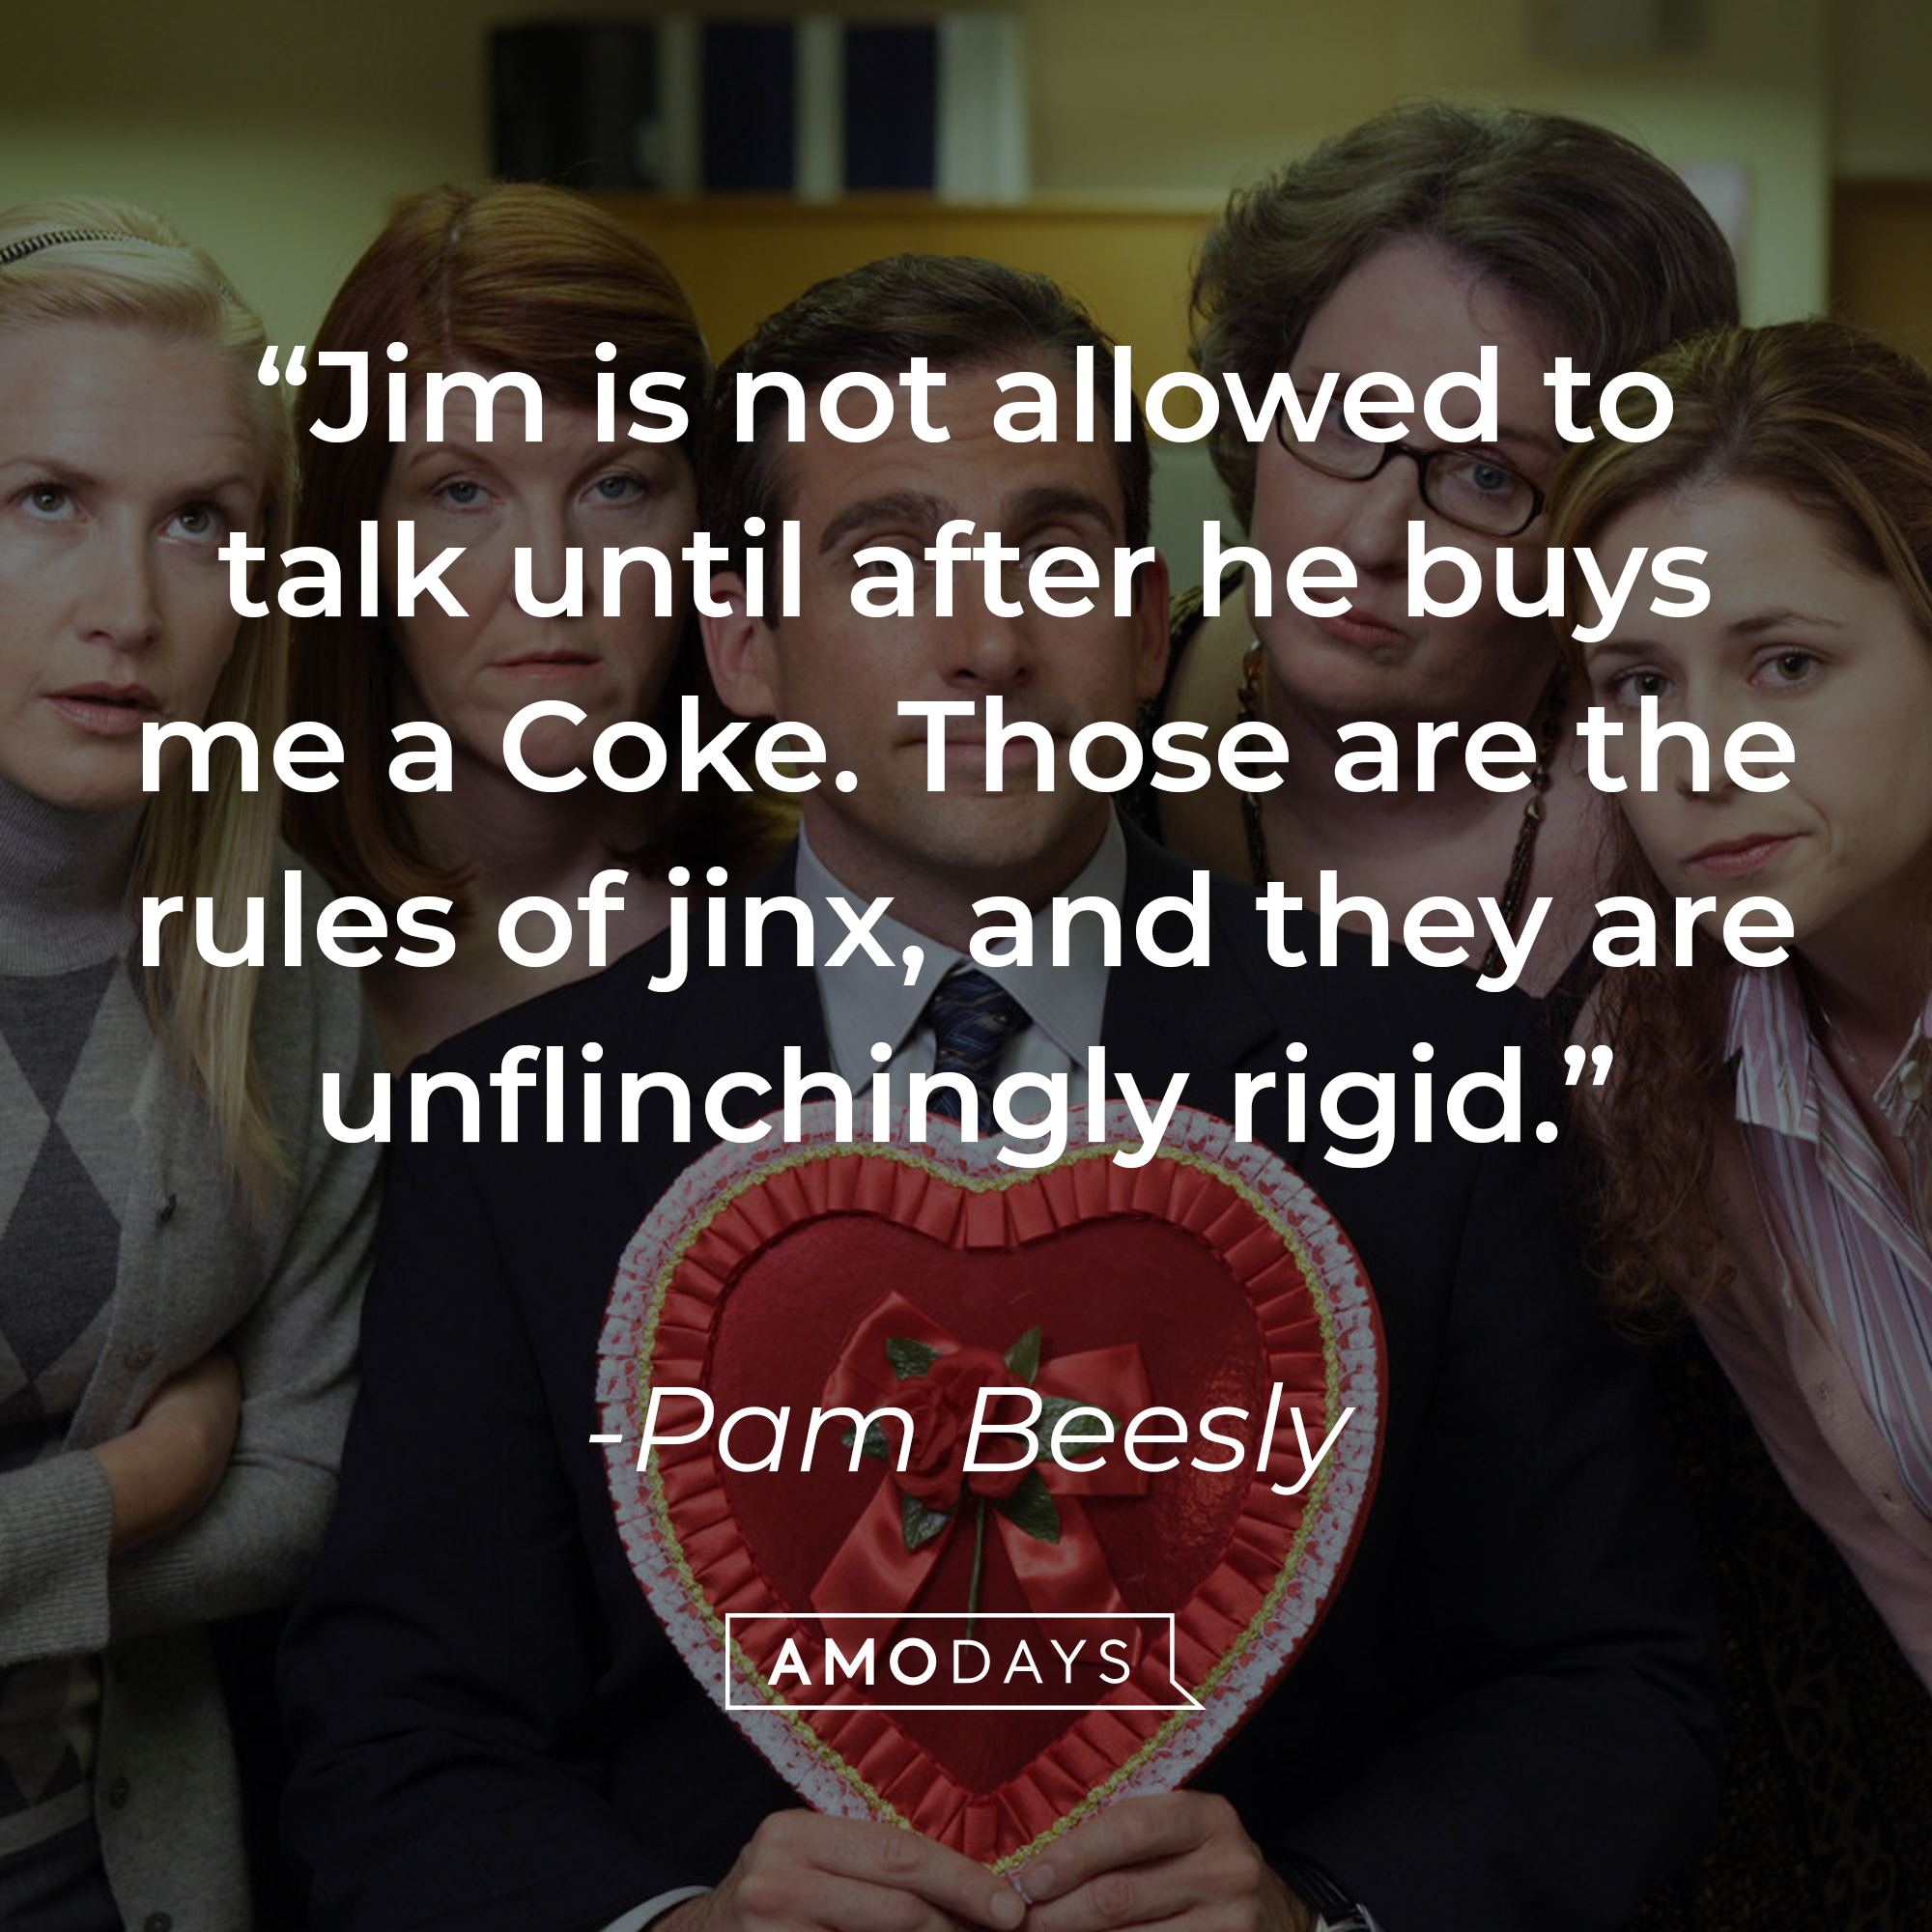 Pam Beesly's quote, "Jim is not allowed to talk until after he buys me a Coke. Those are the rules of jinx, and they are unflinchingly rigid." | Source: Facebook/TheOfficeTV